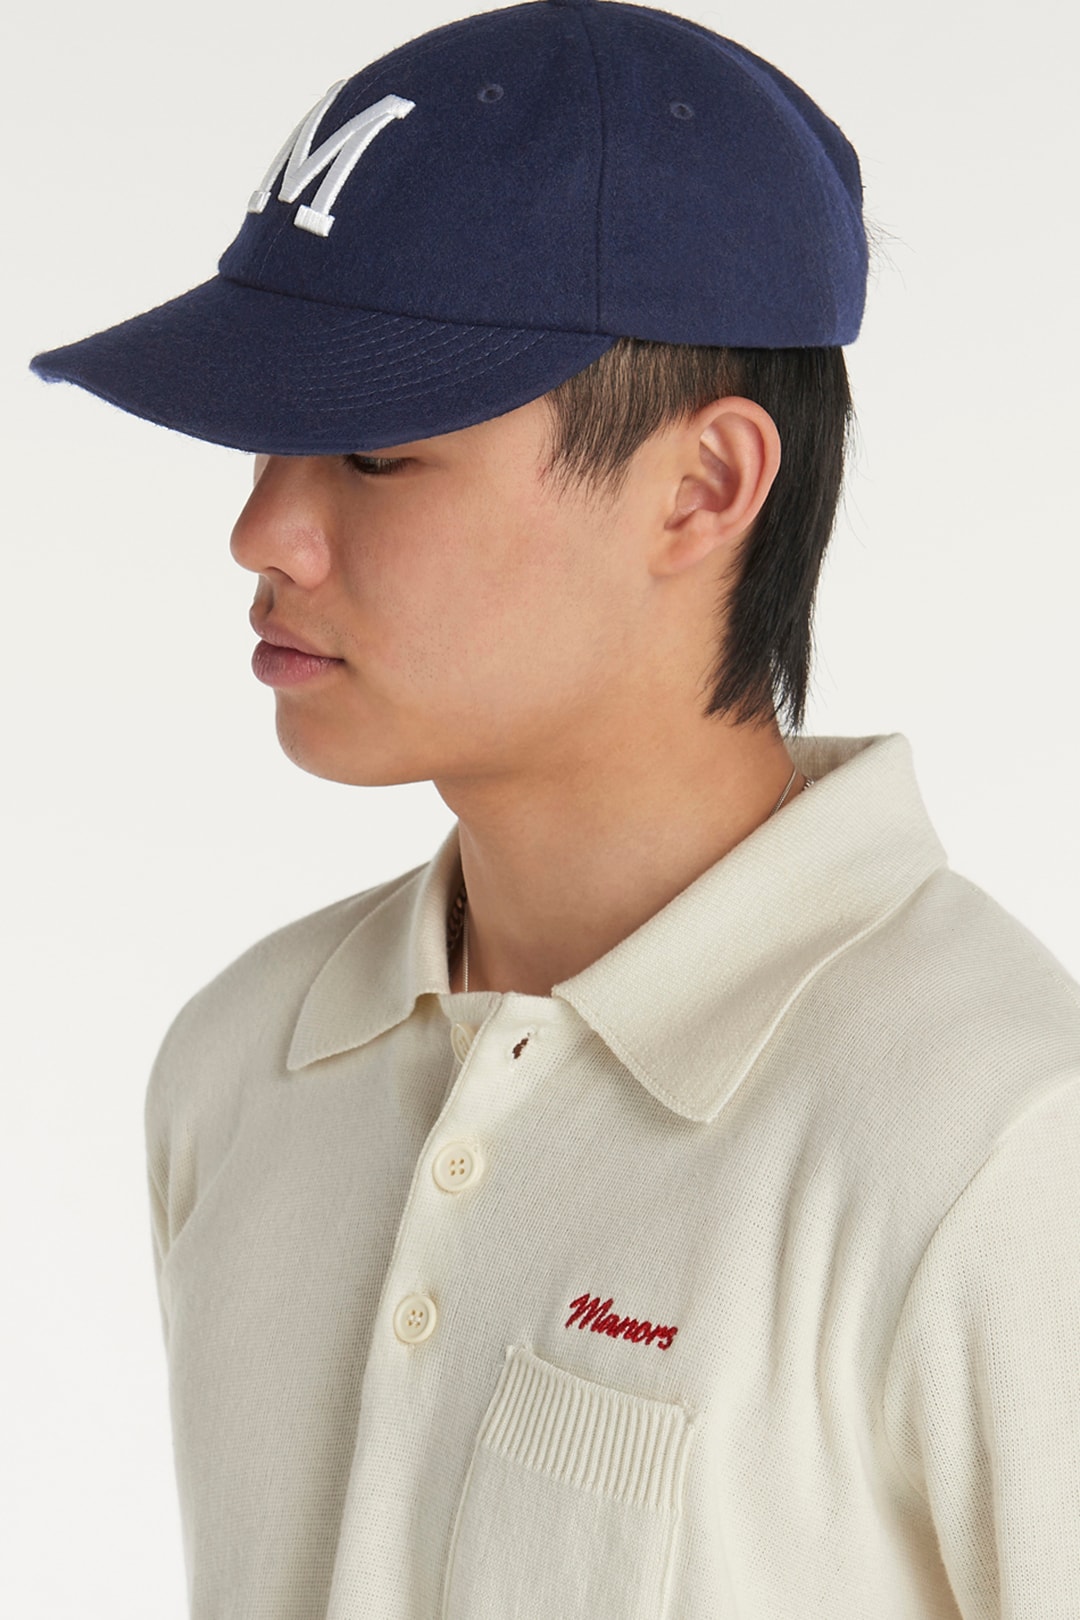 Manors Golf Collection Knitted Polos Wool Caps